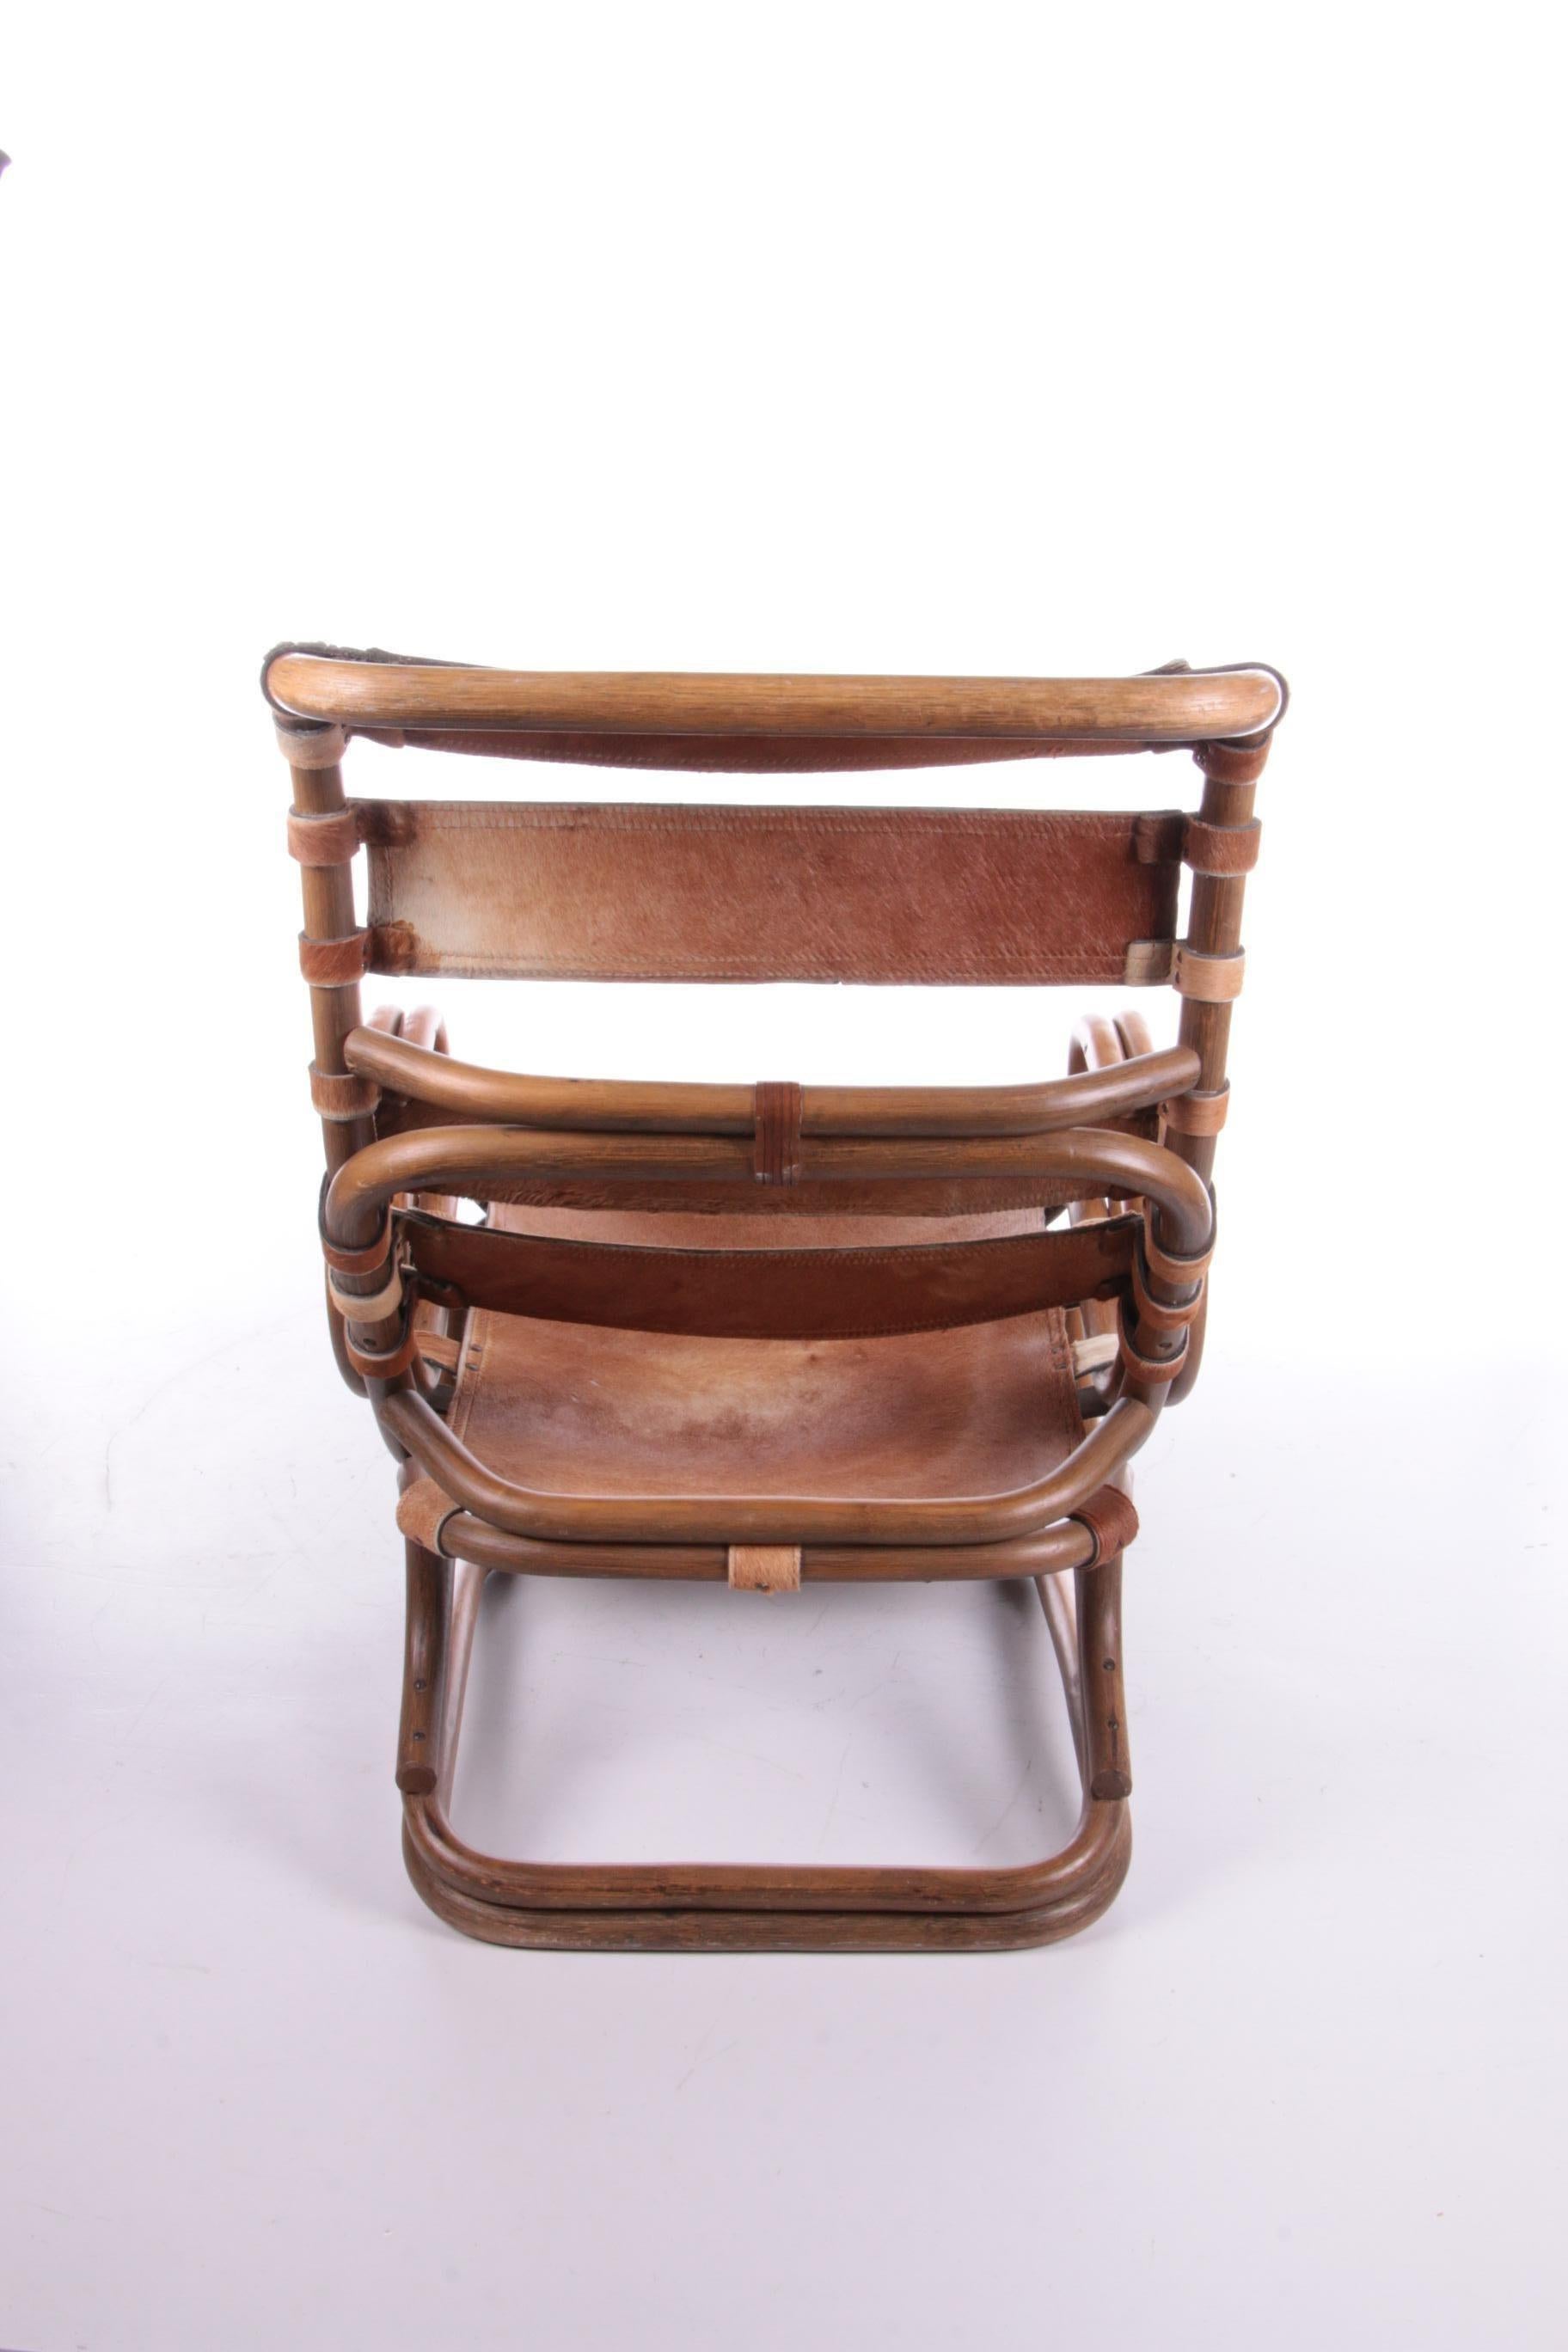 Tito Agnoli Relax Chair Made of Bamboo and Leather, 1960 In Good Condition For Sale In Oostrum-Venray, NL